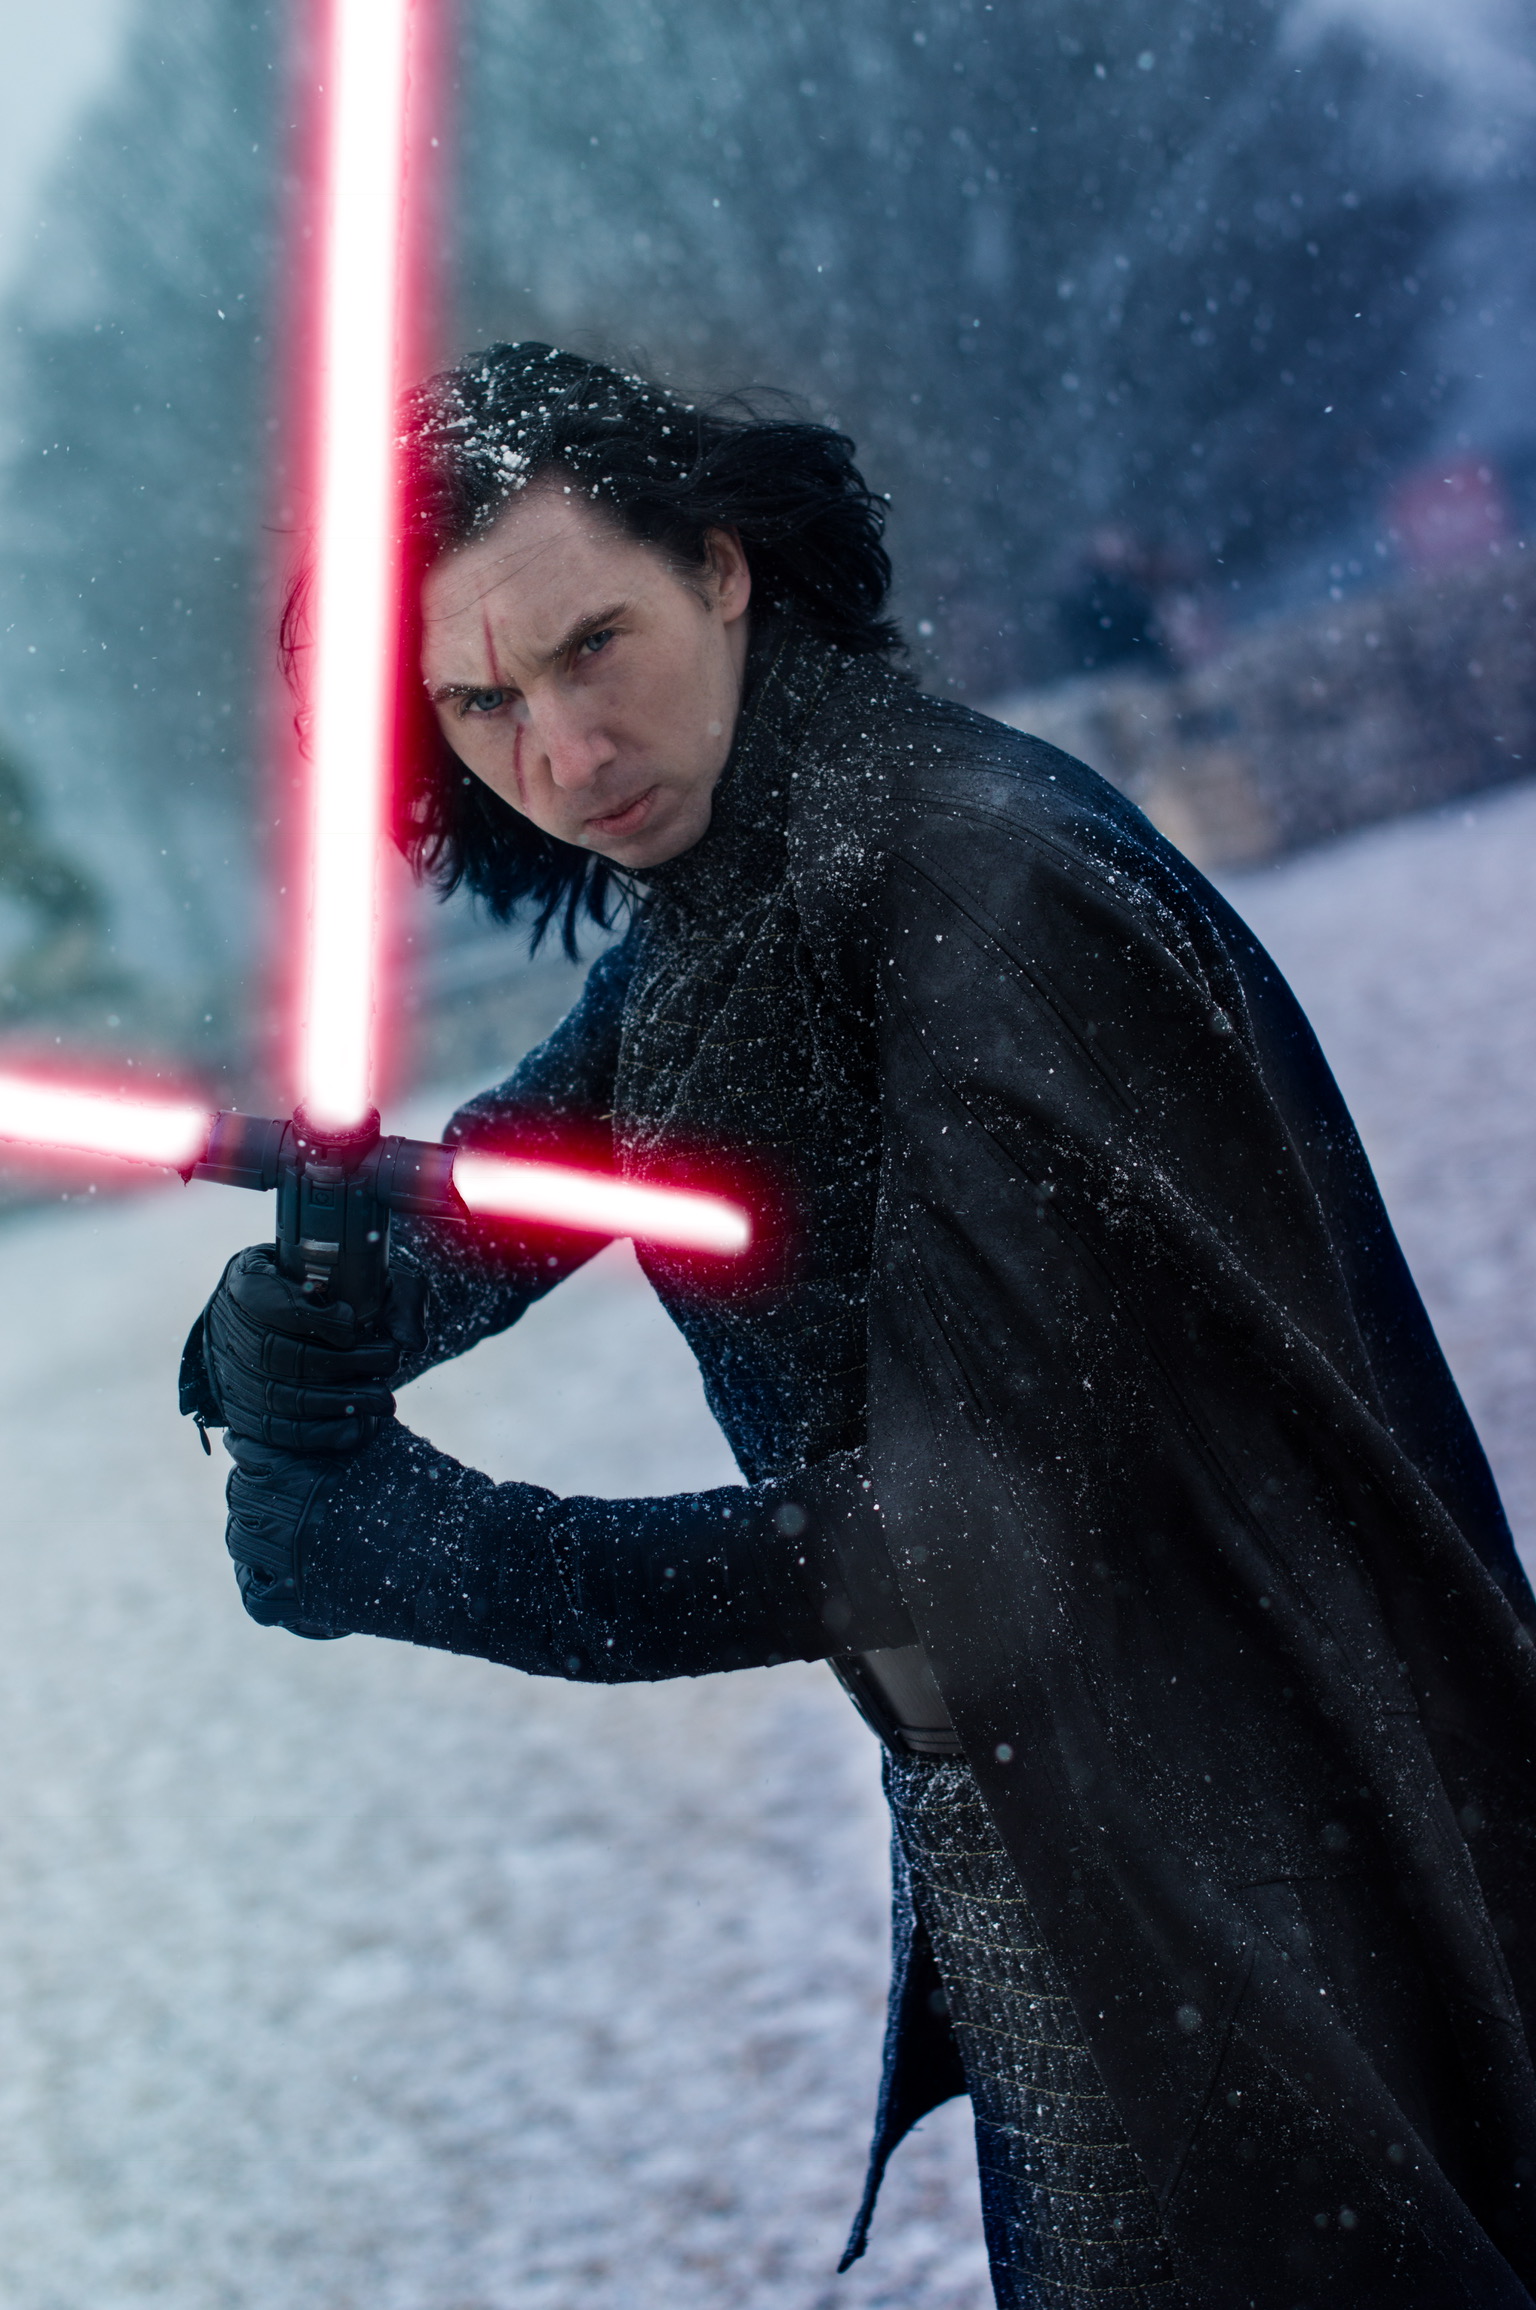 Май рен. Kylo. More Kylo Ren. Easy Kylo Ren Cosplay. Kylo Ren May the 4th be with you.